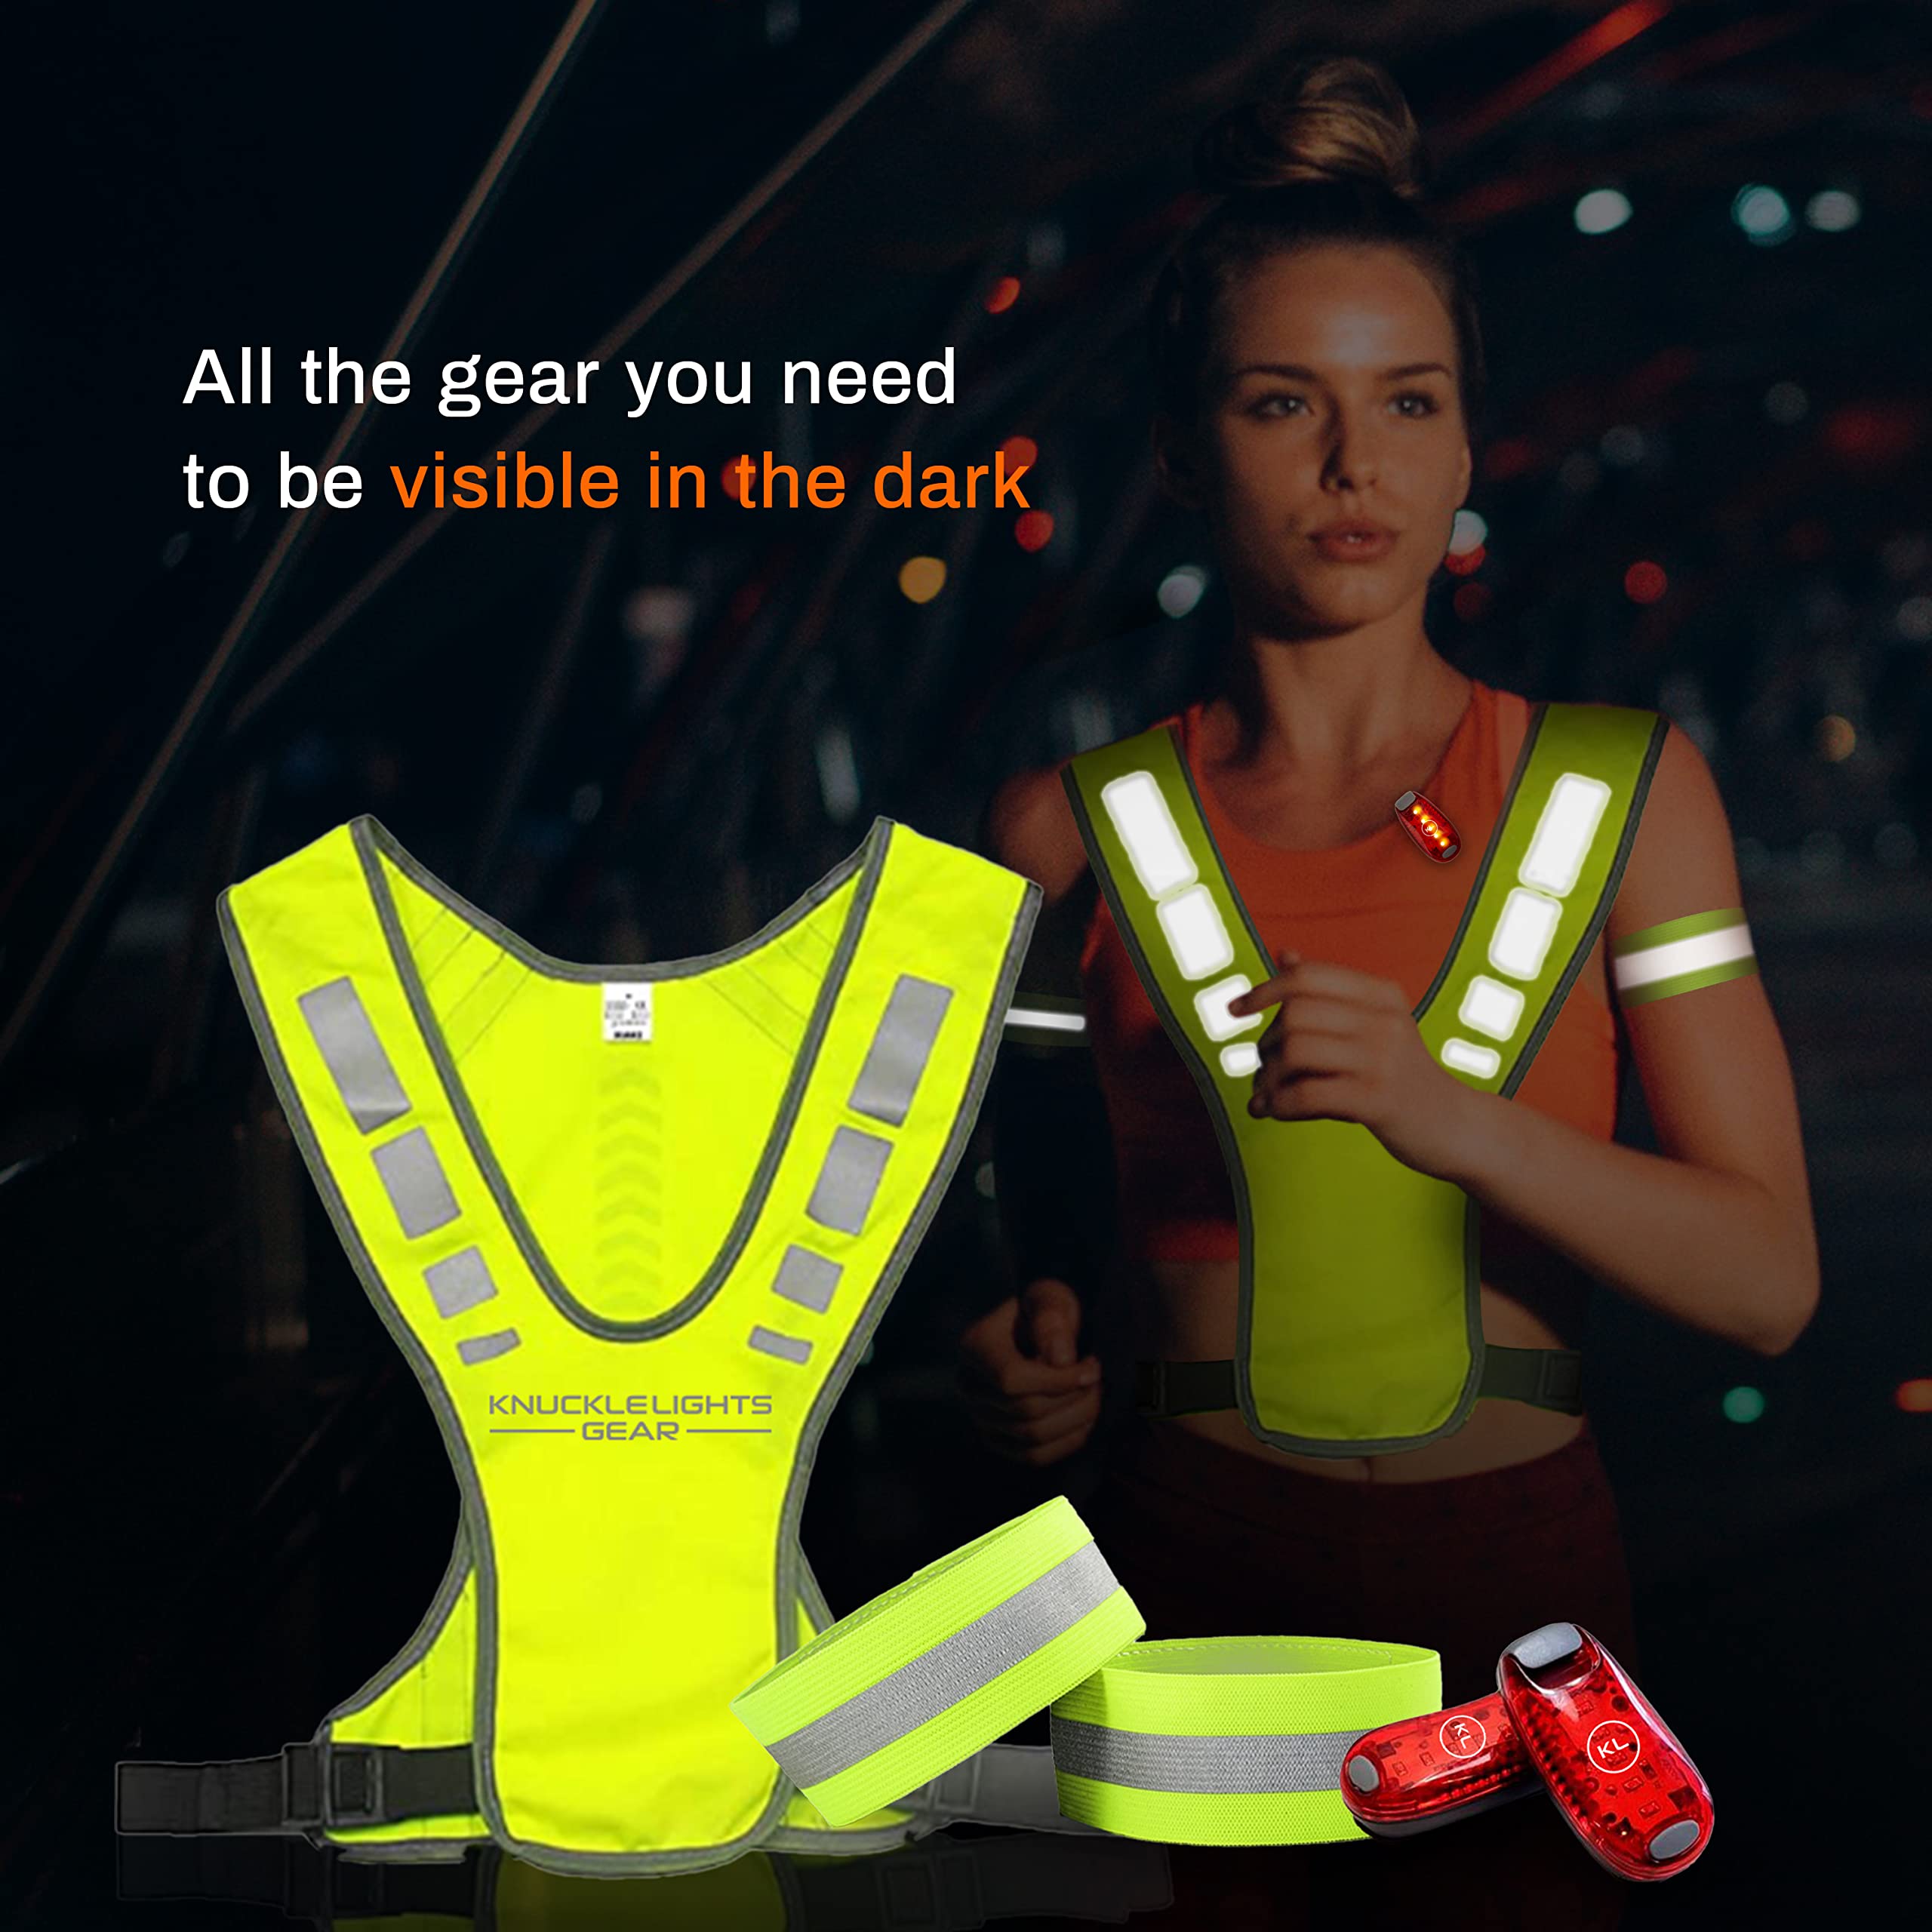 Knuckle Lights Reflective Running Gear Safety Bundle - Reflective Vest, LED Safety Light, Reflective Bands, Night Safety Gear for Runners, Cycling, Hiking, Walking - High Visibility Reflective Gear